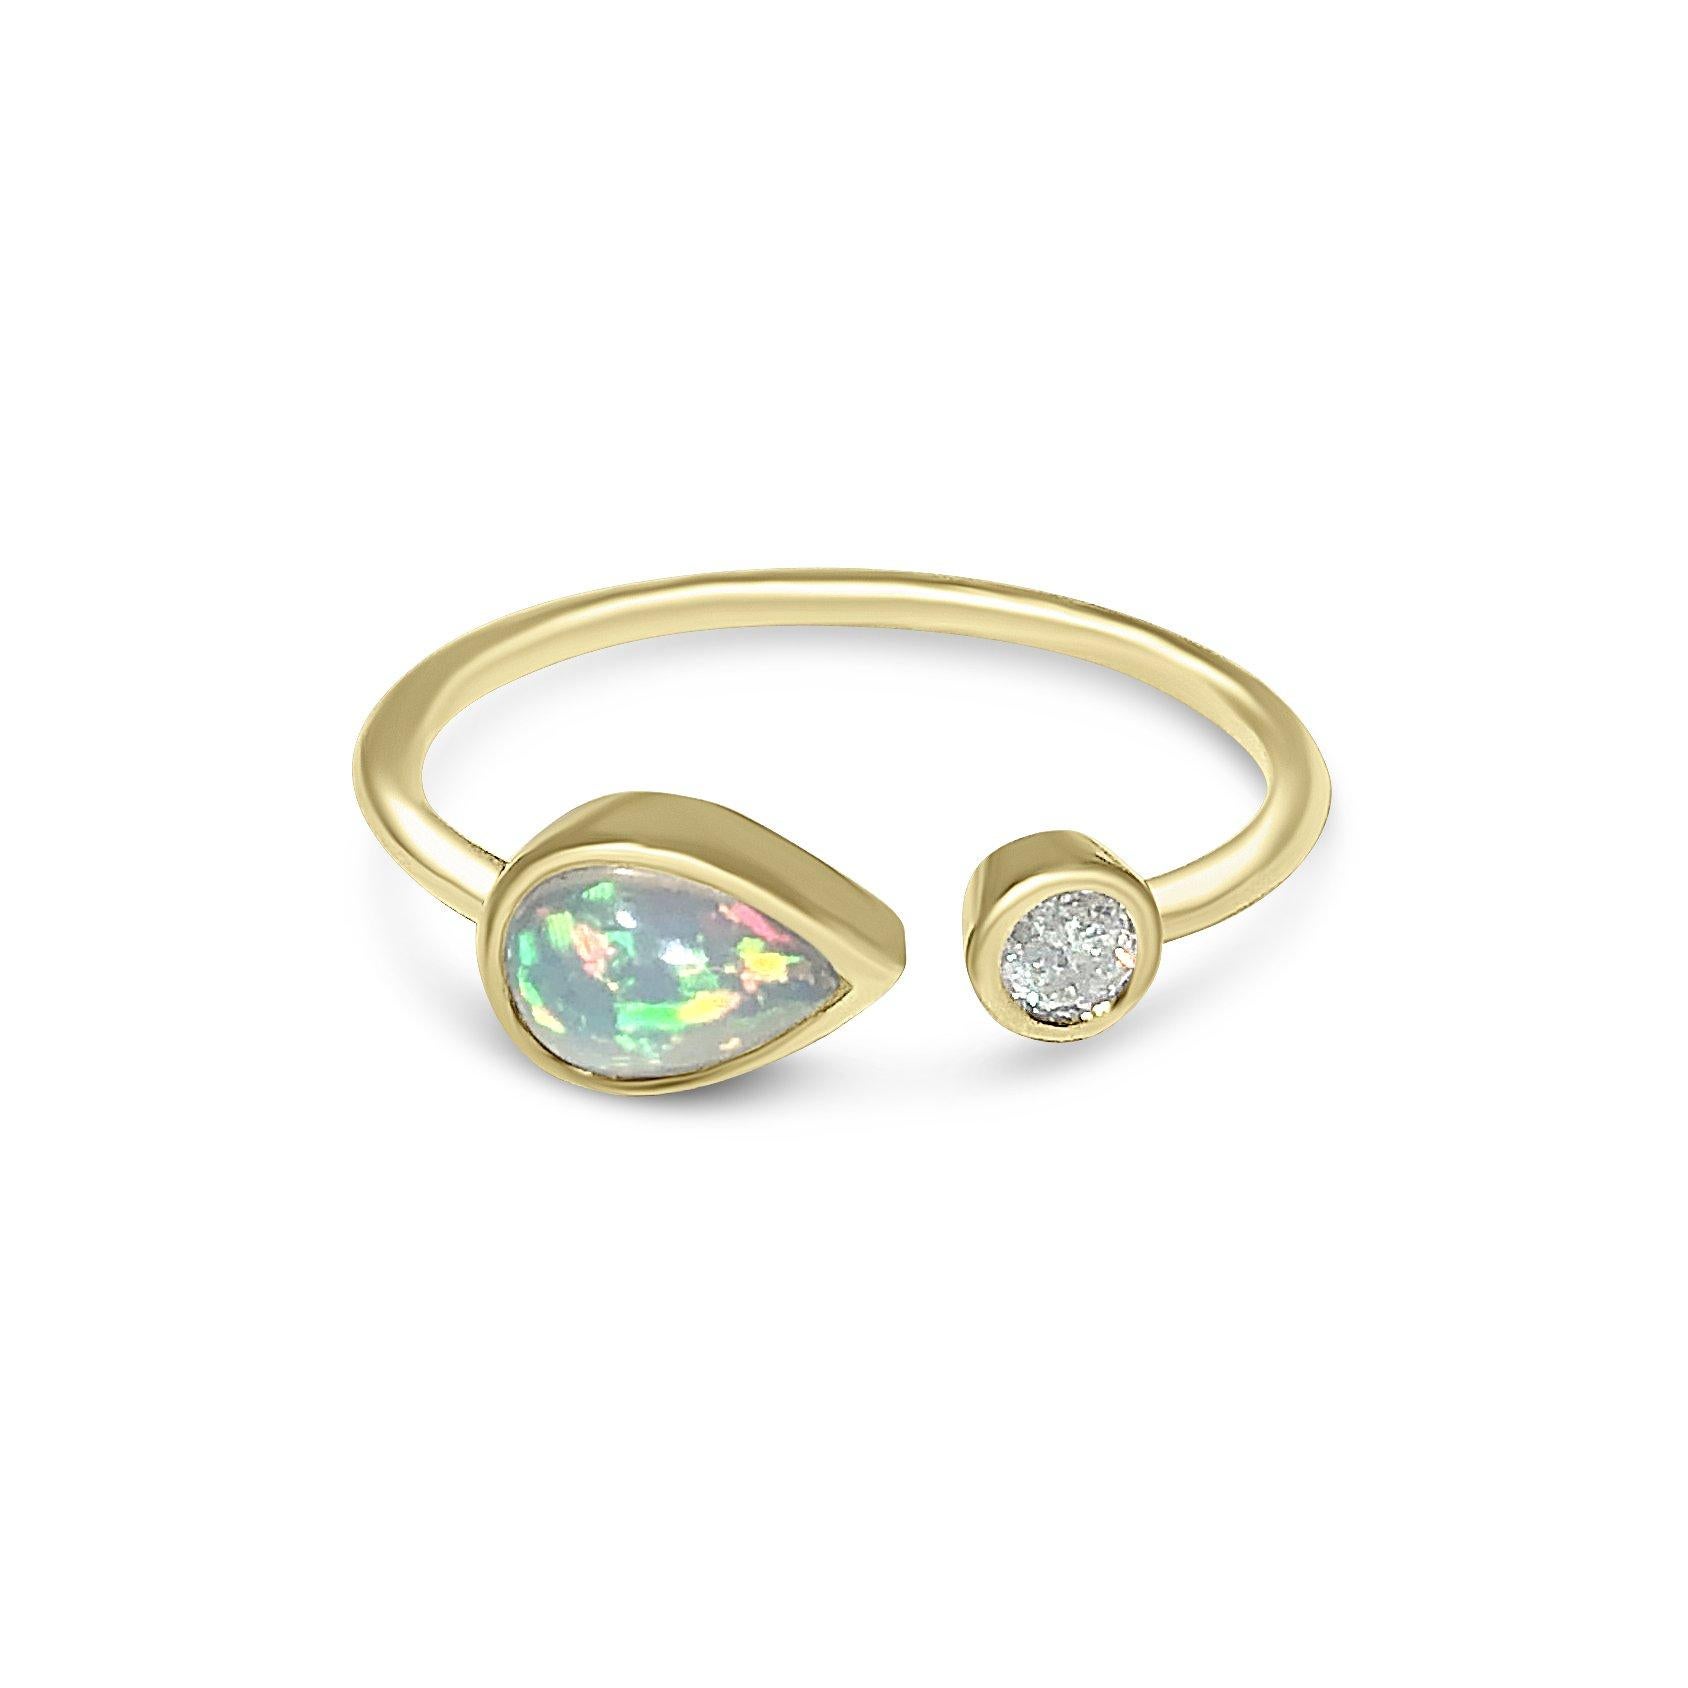 Shop our 14K gold, teardrop-shaped opal and bezel-set diamond ring

Specifications:
- Color: Yellow Gold
- Metal: 14K gold
- Stone: Opal, Diamond
- Stone Weight: Opal-0.65CT, Diamond-0.07ct
- Stone Size: Opal-6mm, Diamond-2mm
- Ring Size: